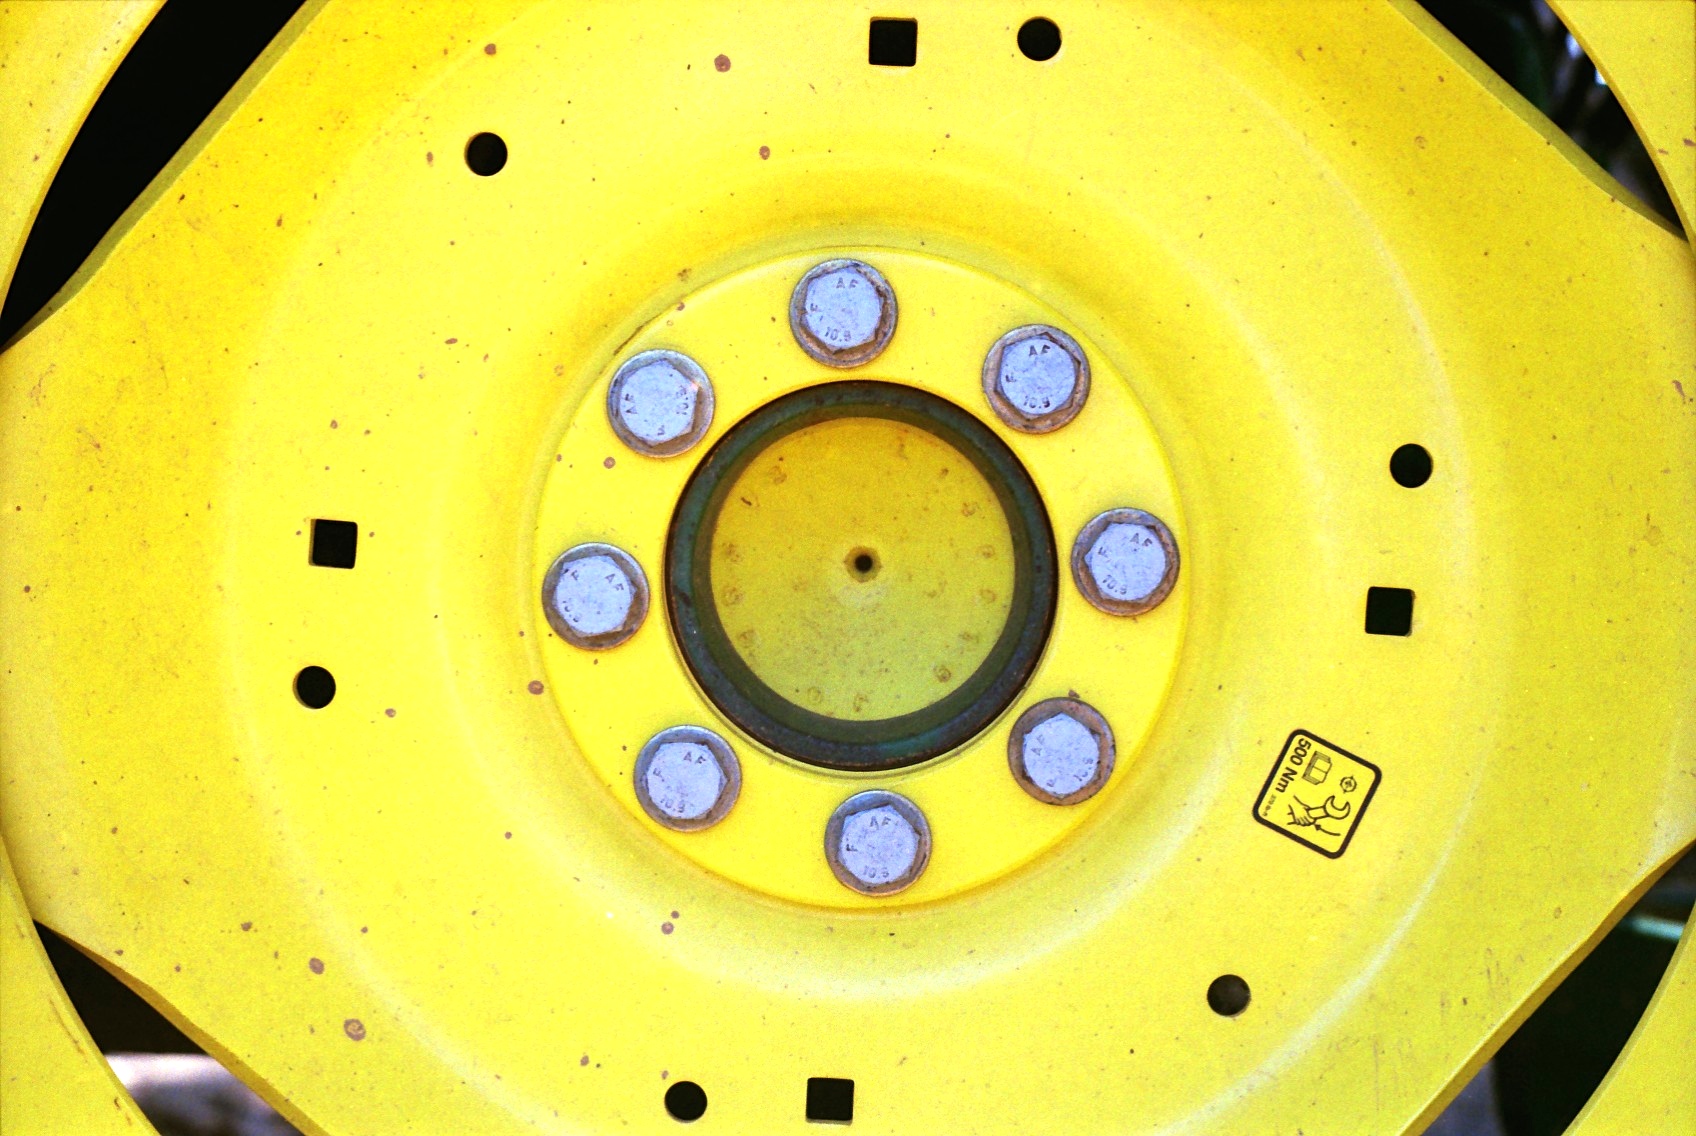 a close up view of the center of a yellow object